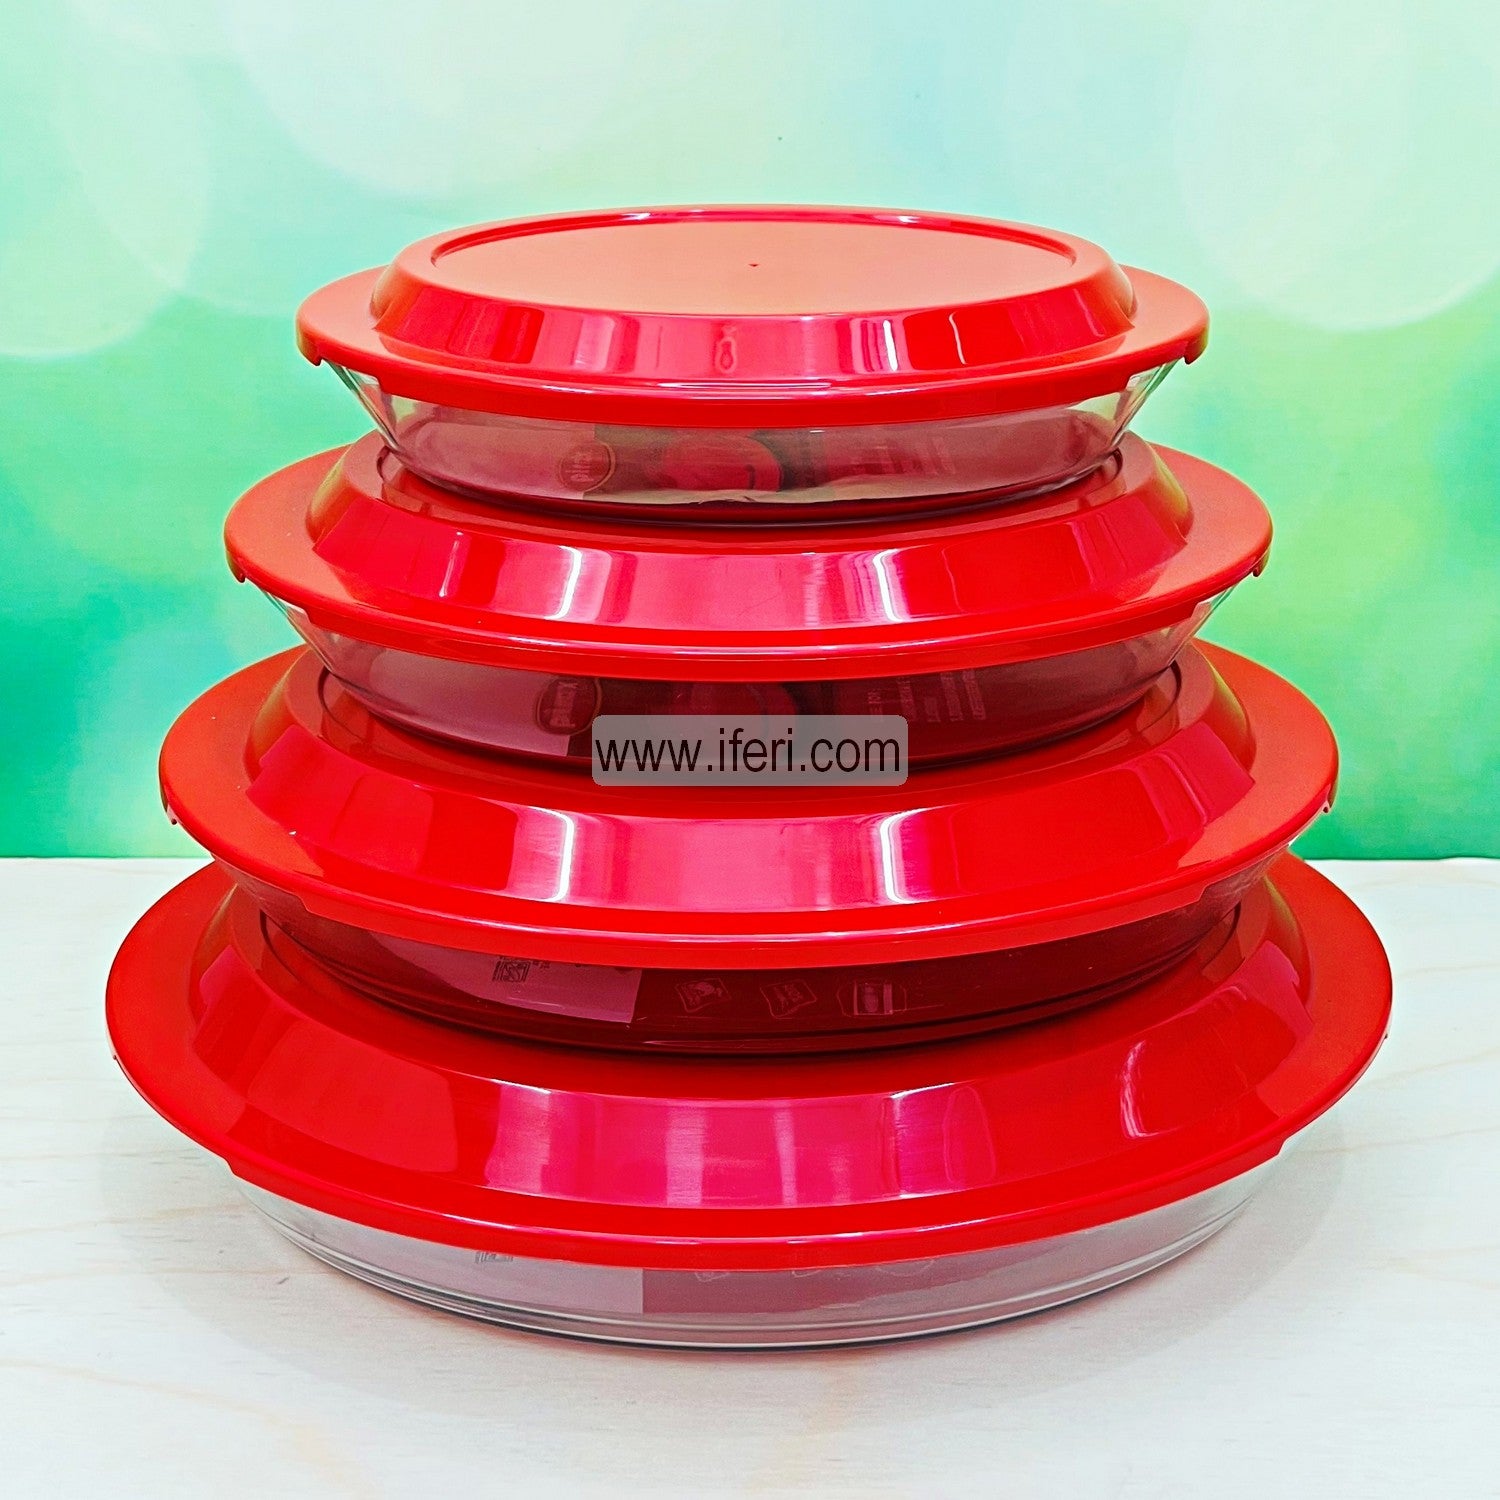 4 Pcs Tempered Glass Oval Shaped Casserole Set with Lid FH2230